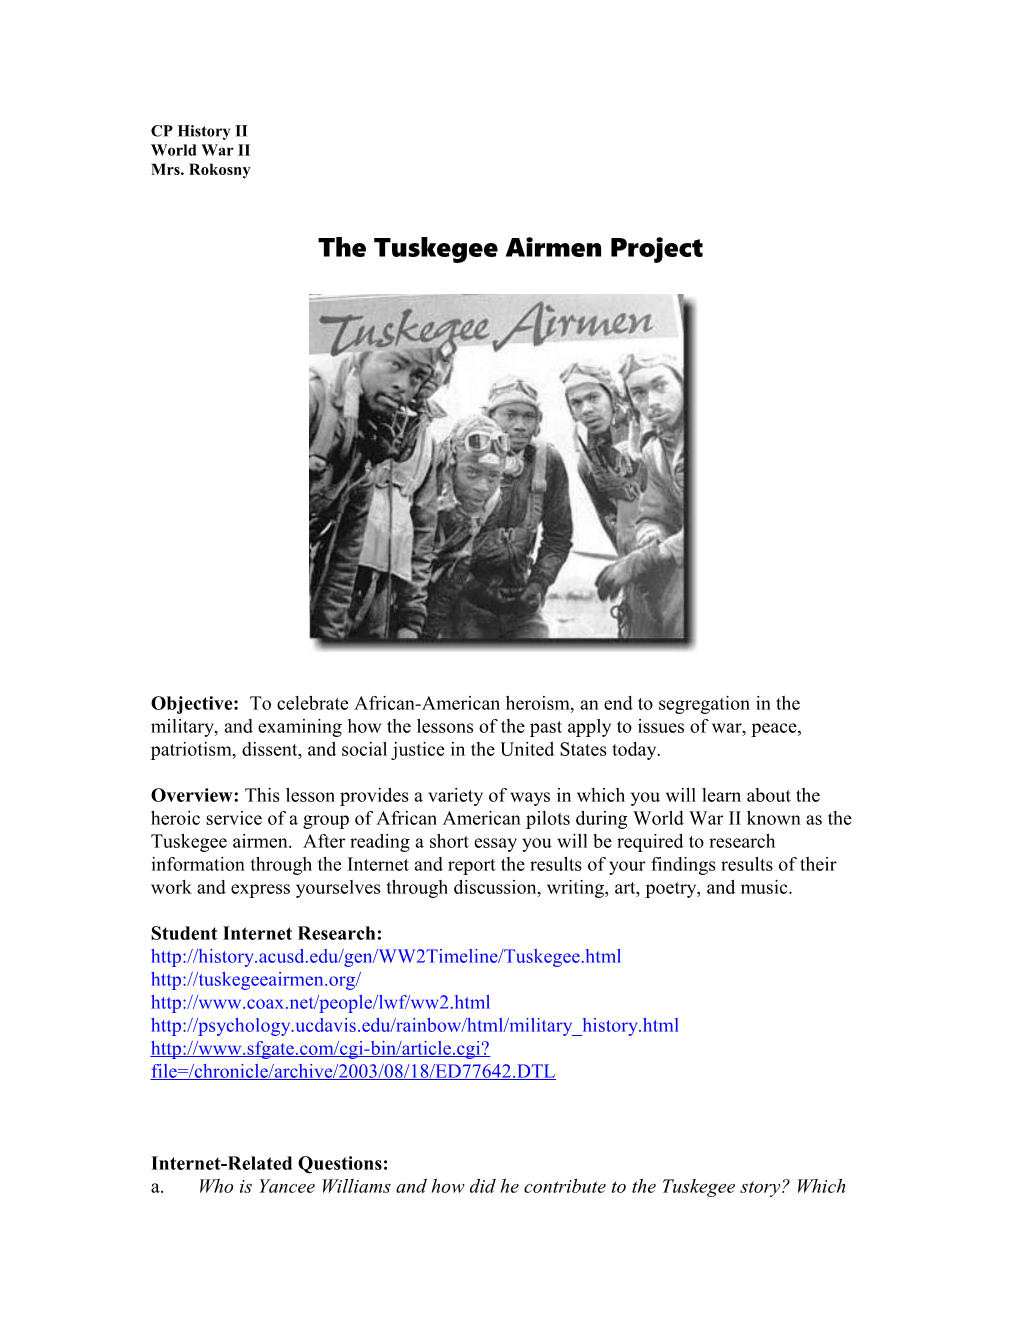 The Tuskegee Airmen Project